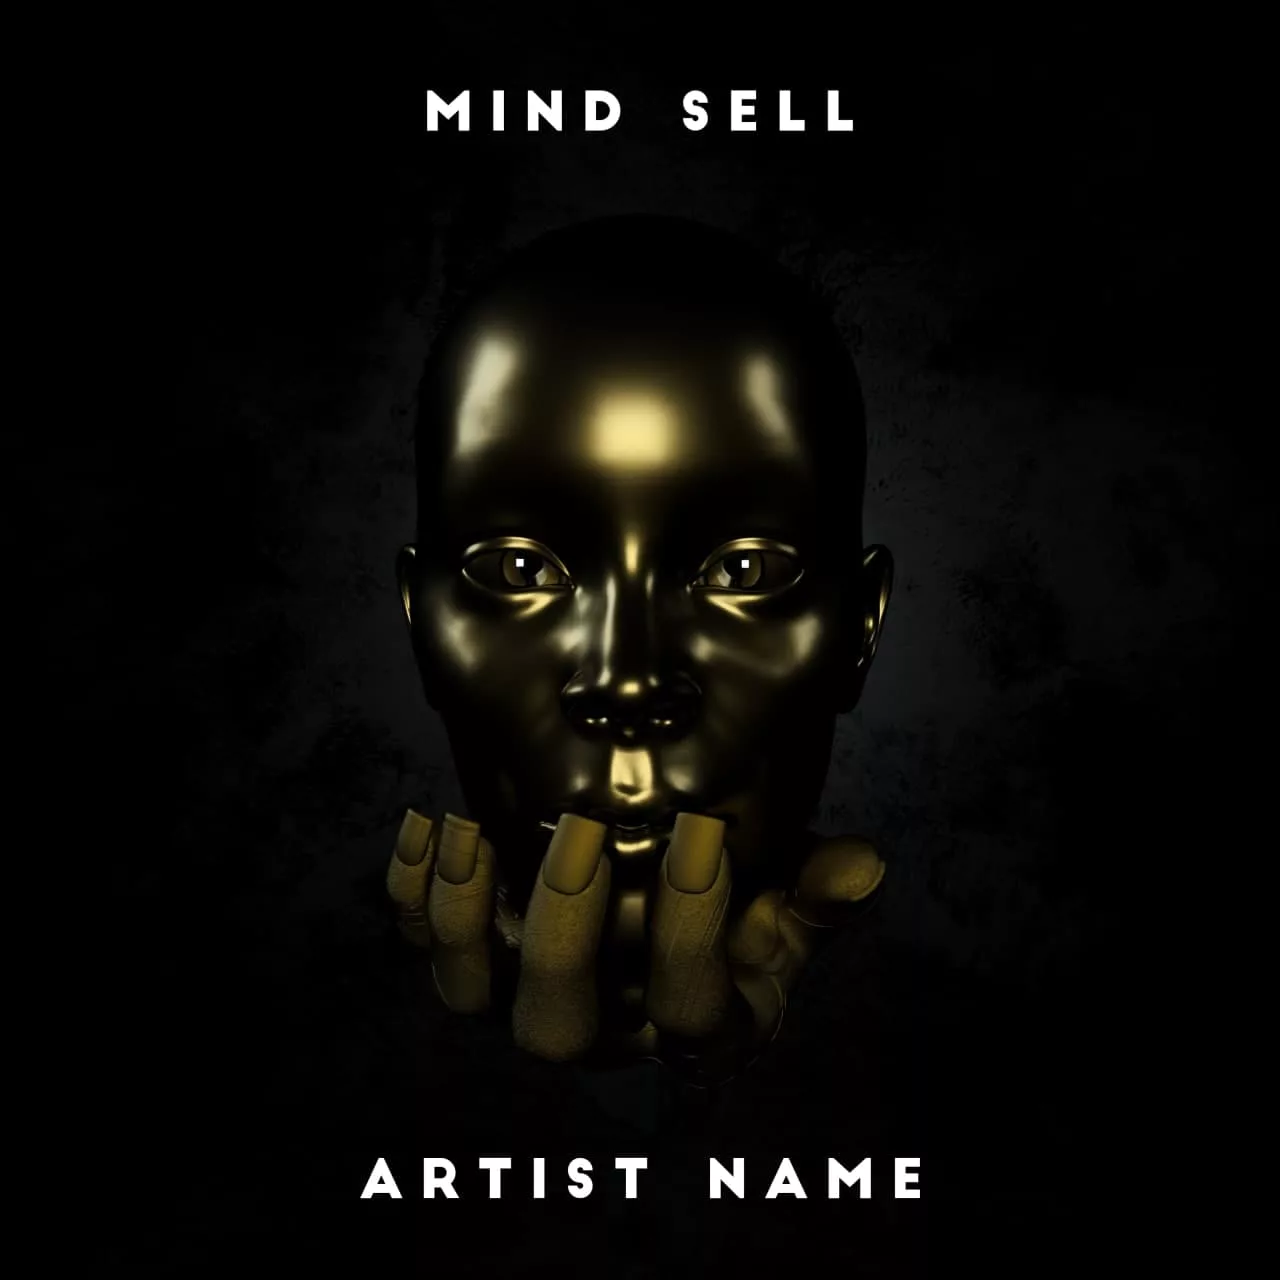 Mind sell cover art for sale